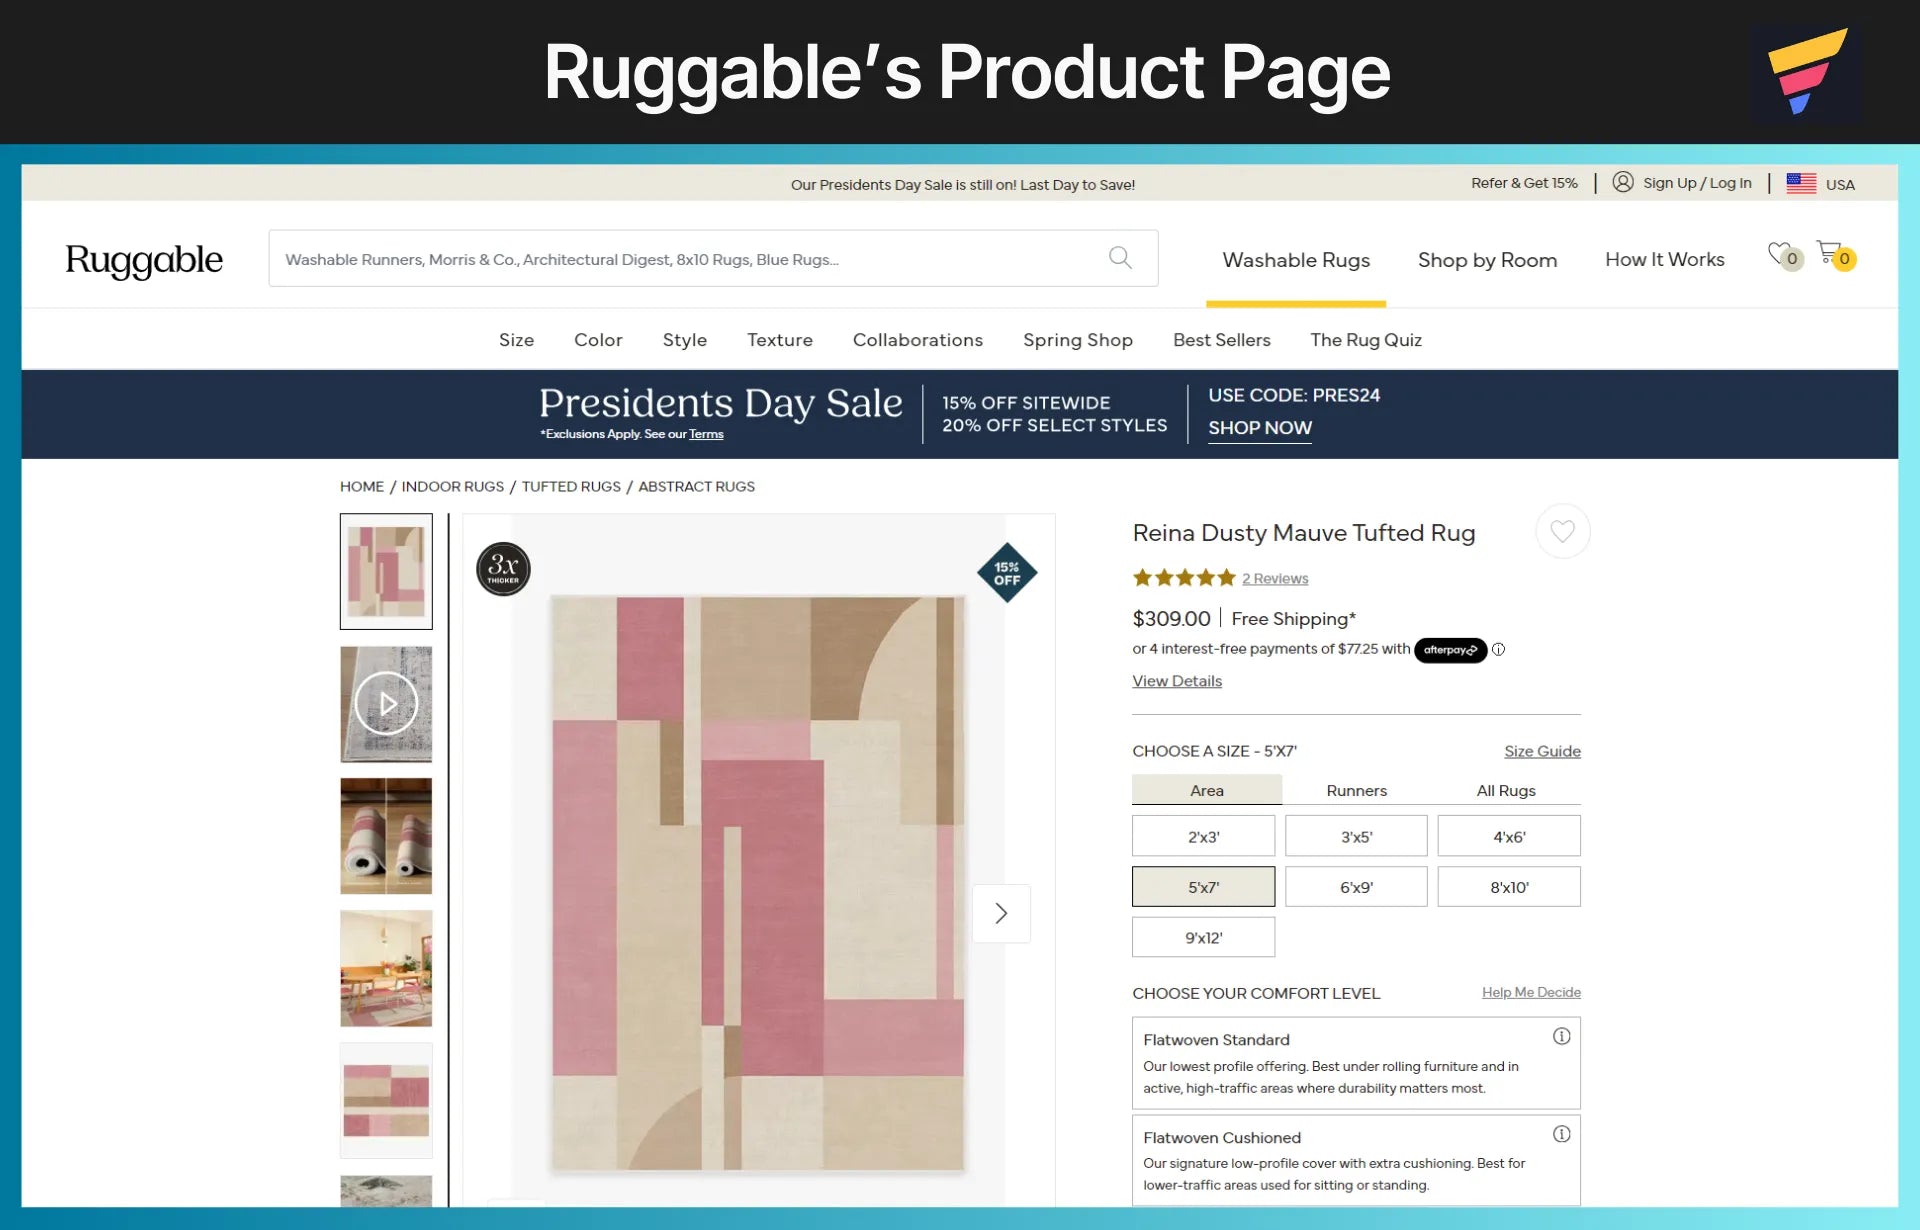 Ruggable’s Product Page